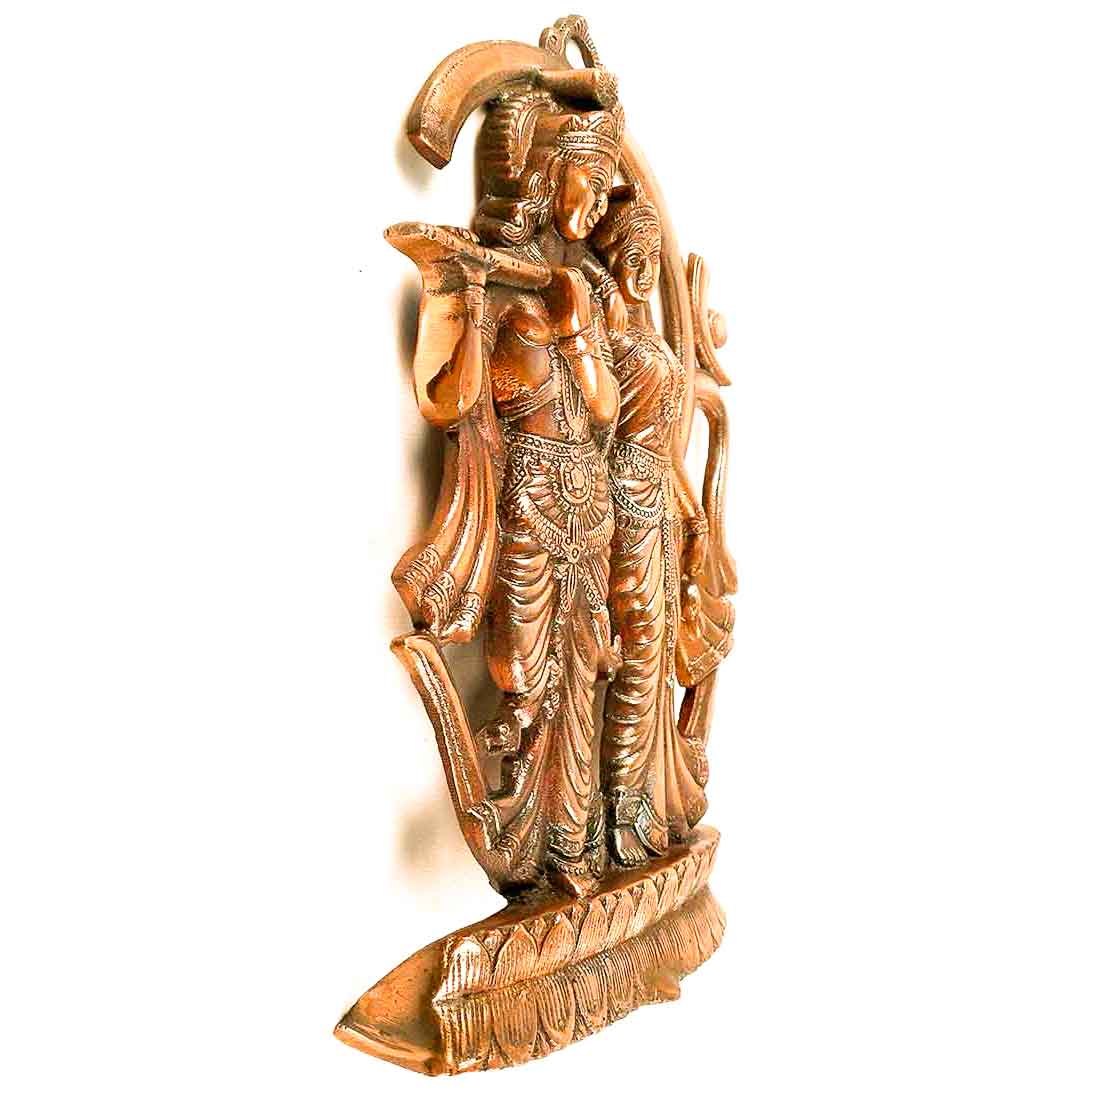 Radha Krishna Murti Wall Hanging | Shri Radhe Krishna Playing Flute With Om Wall Art Statue Idol  - for Home, Living Room, Office, Puja , Entrance Decoration & Gifts - 25 inch